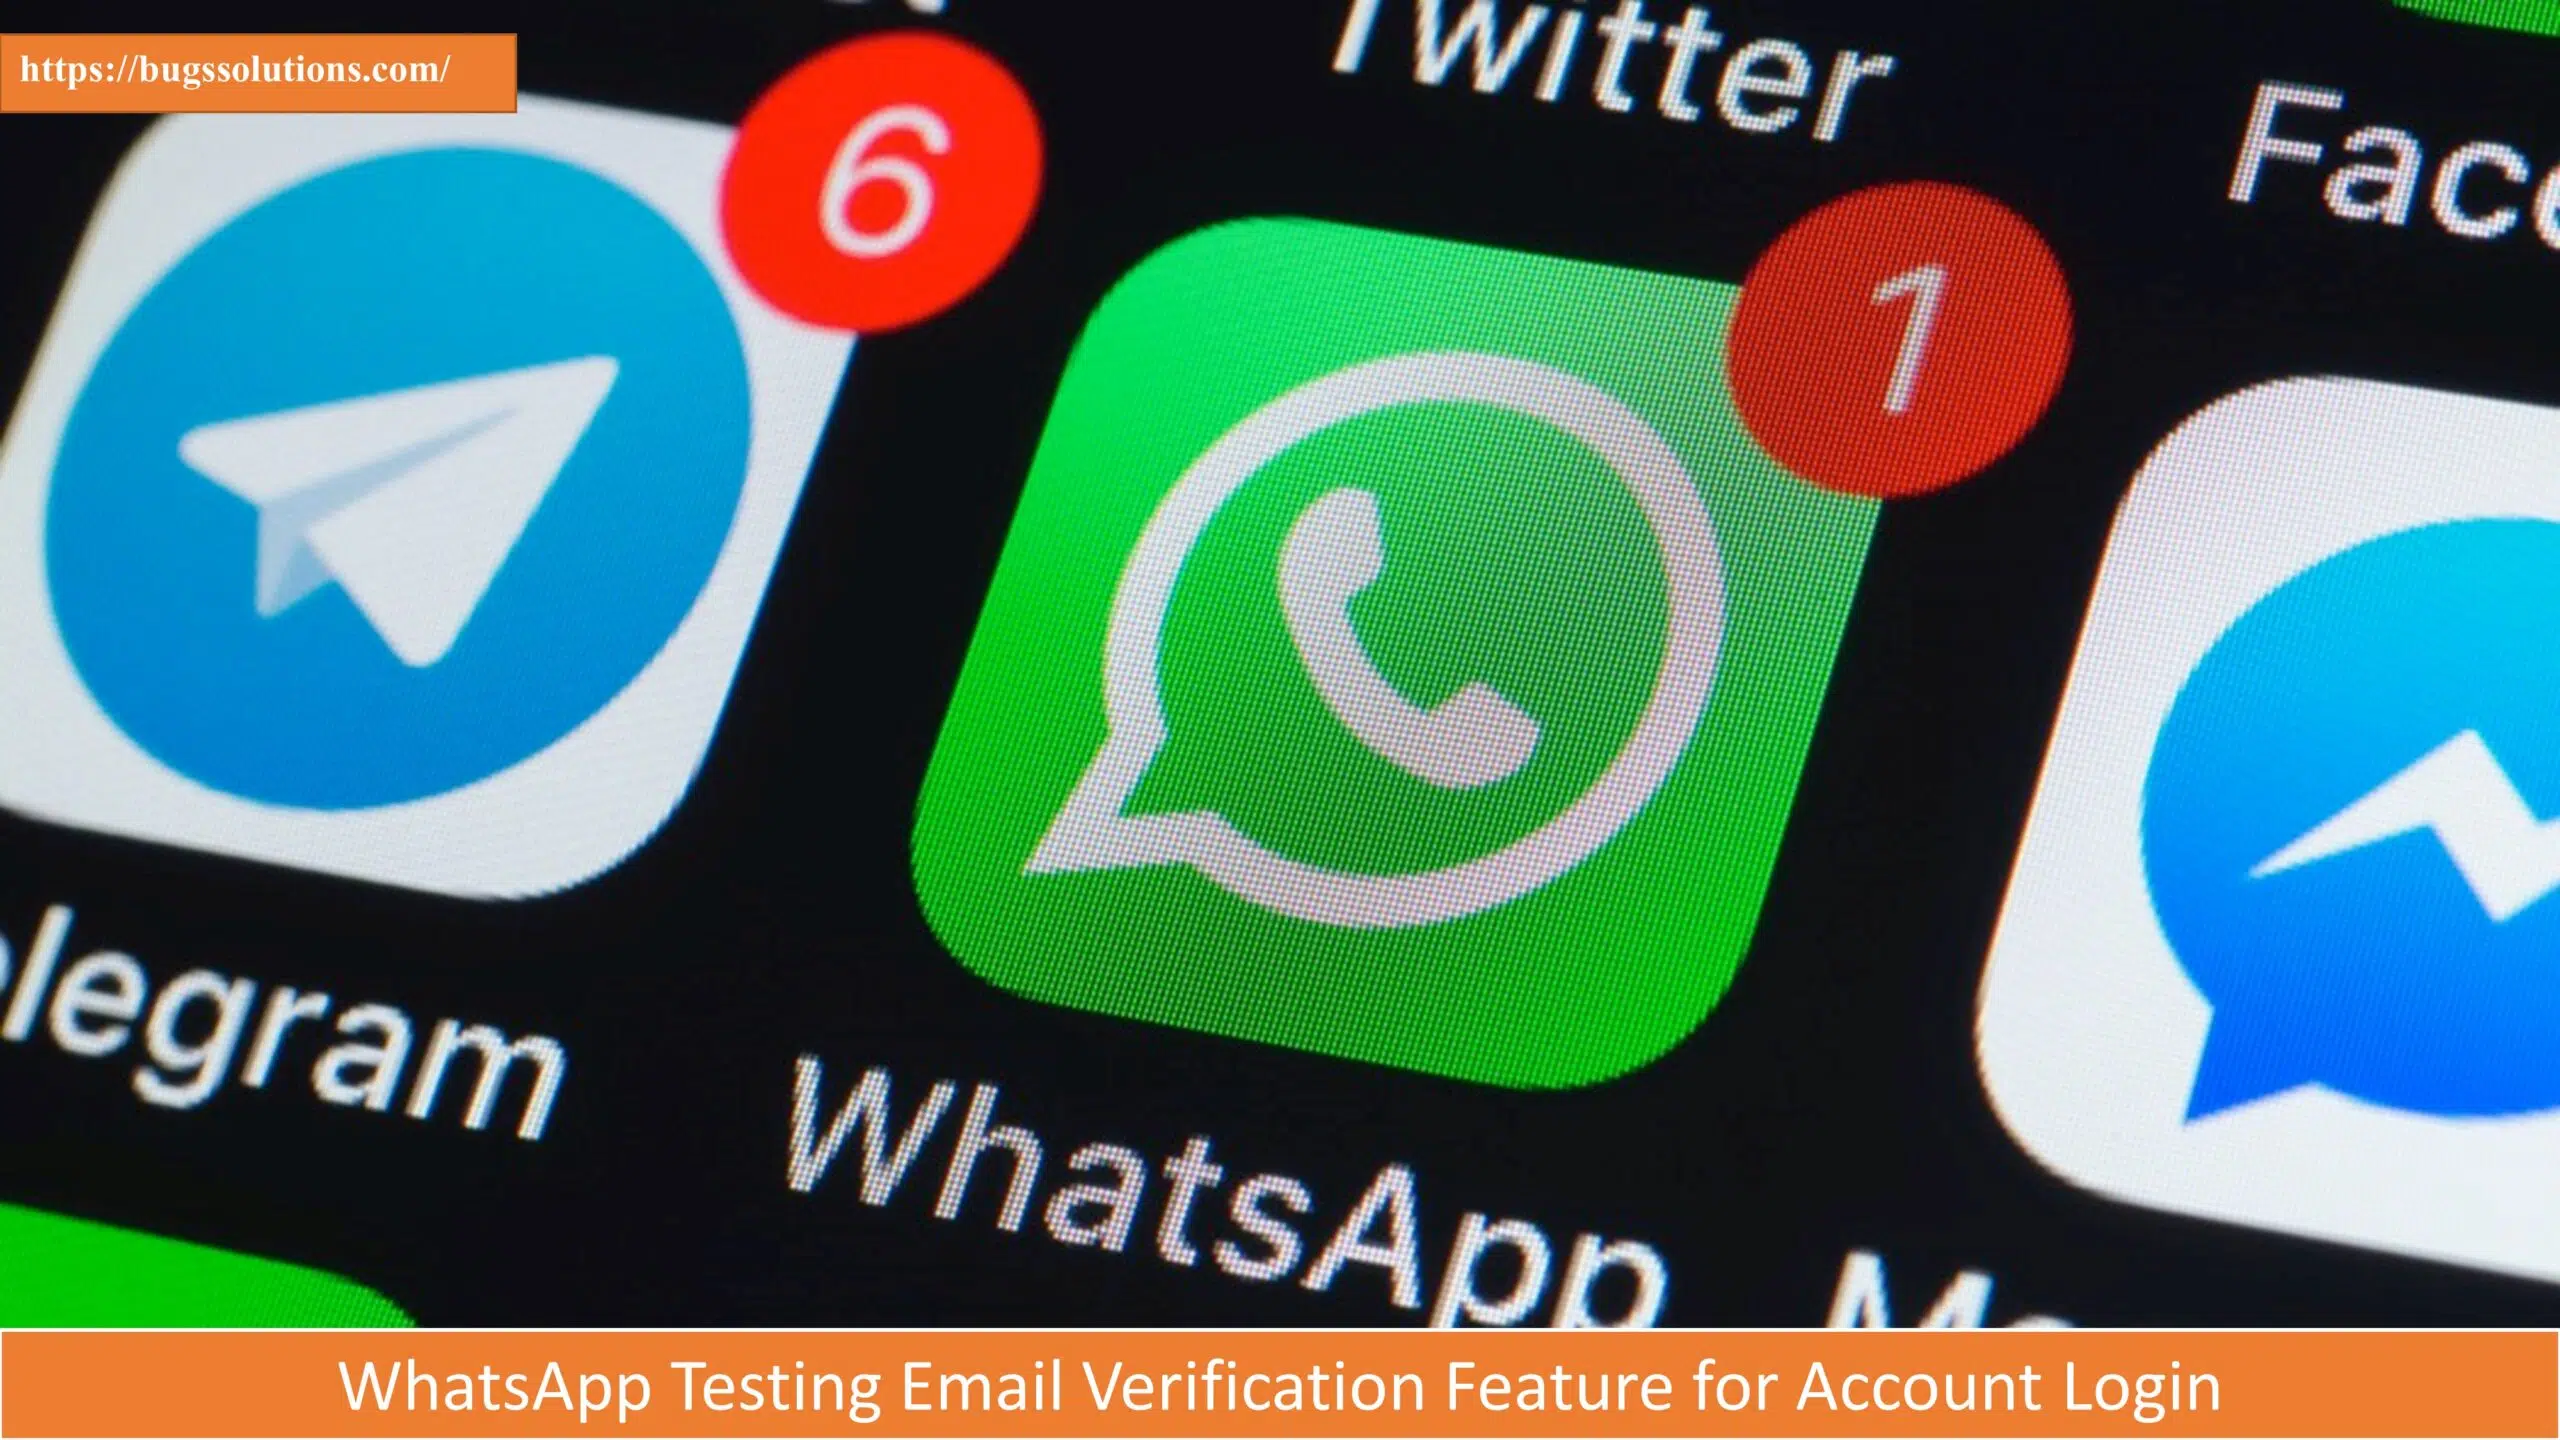 WhatsApp Testing Email Verification Feature for Account Login